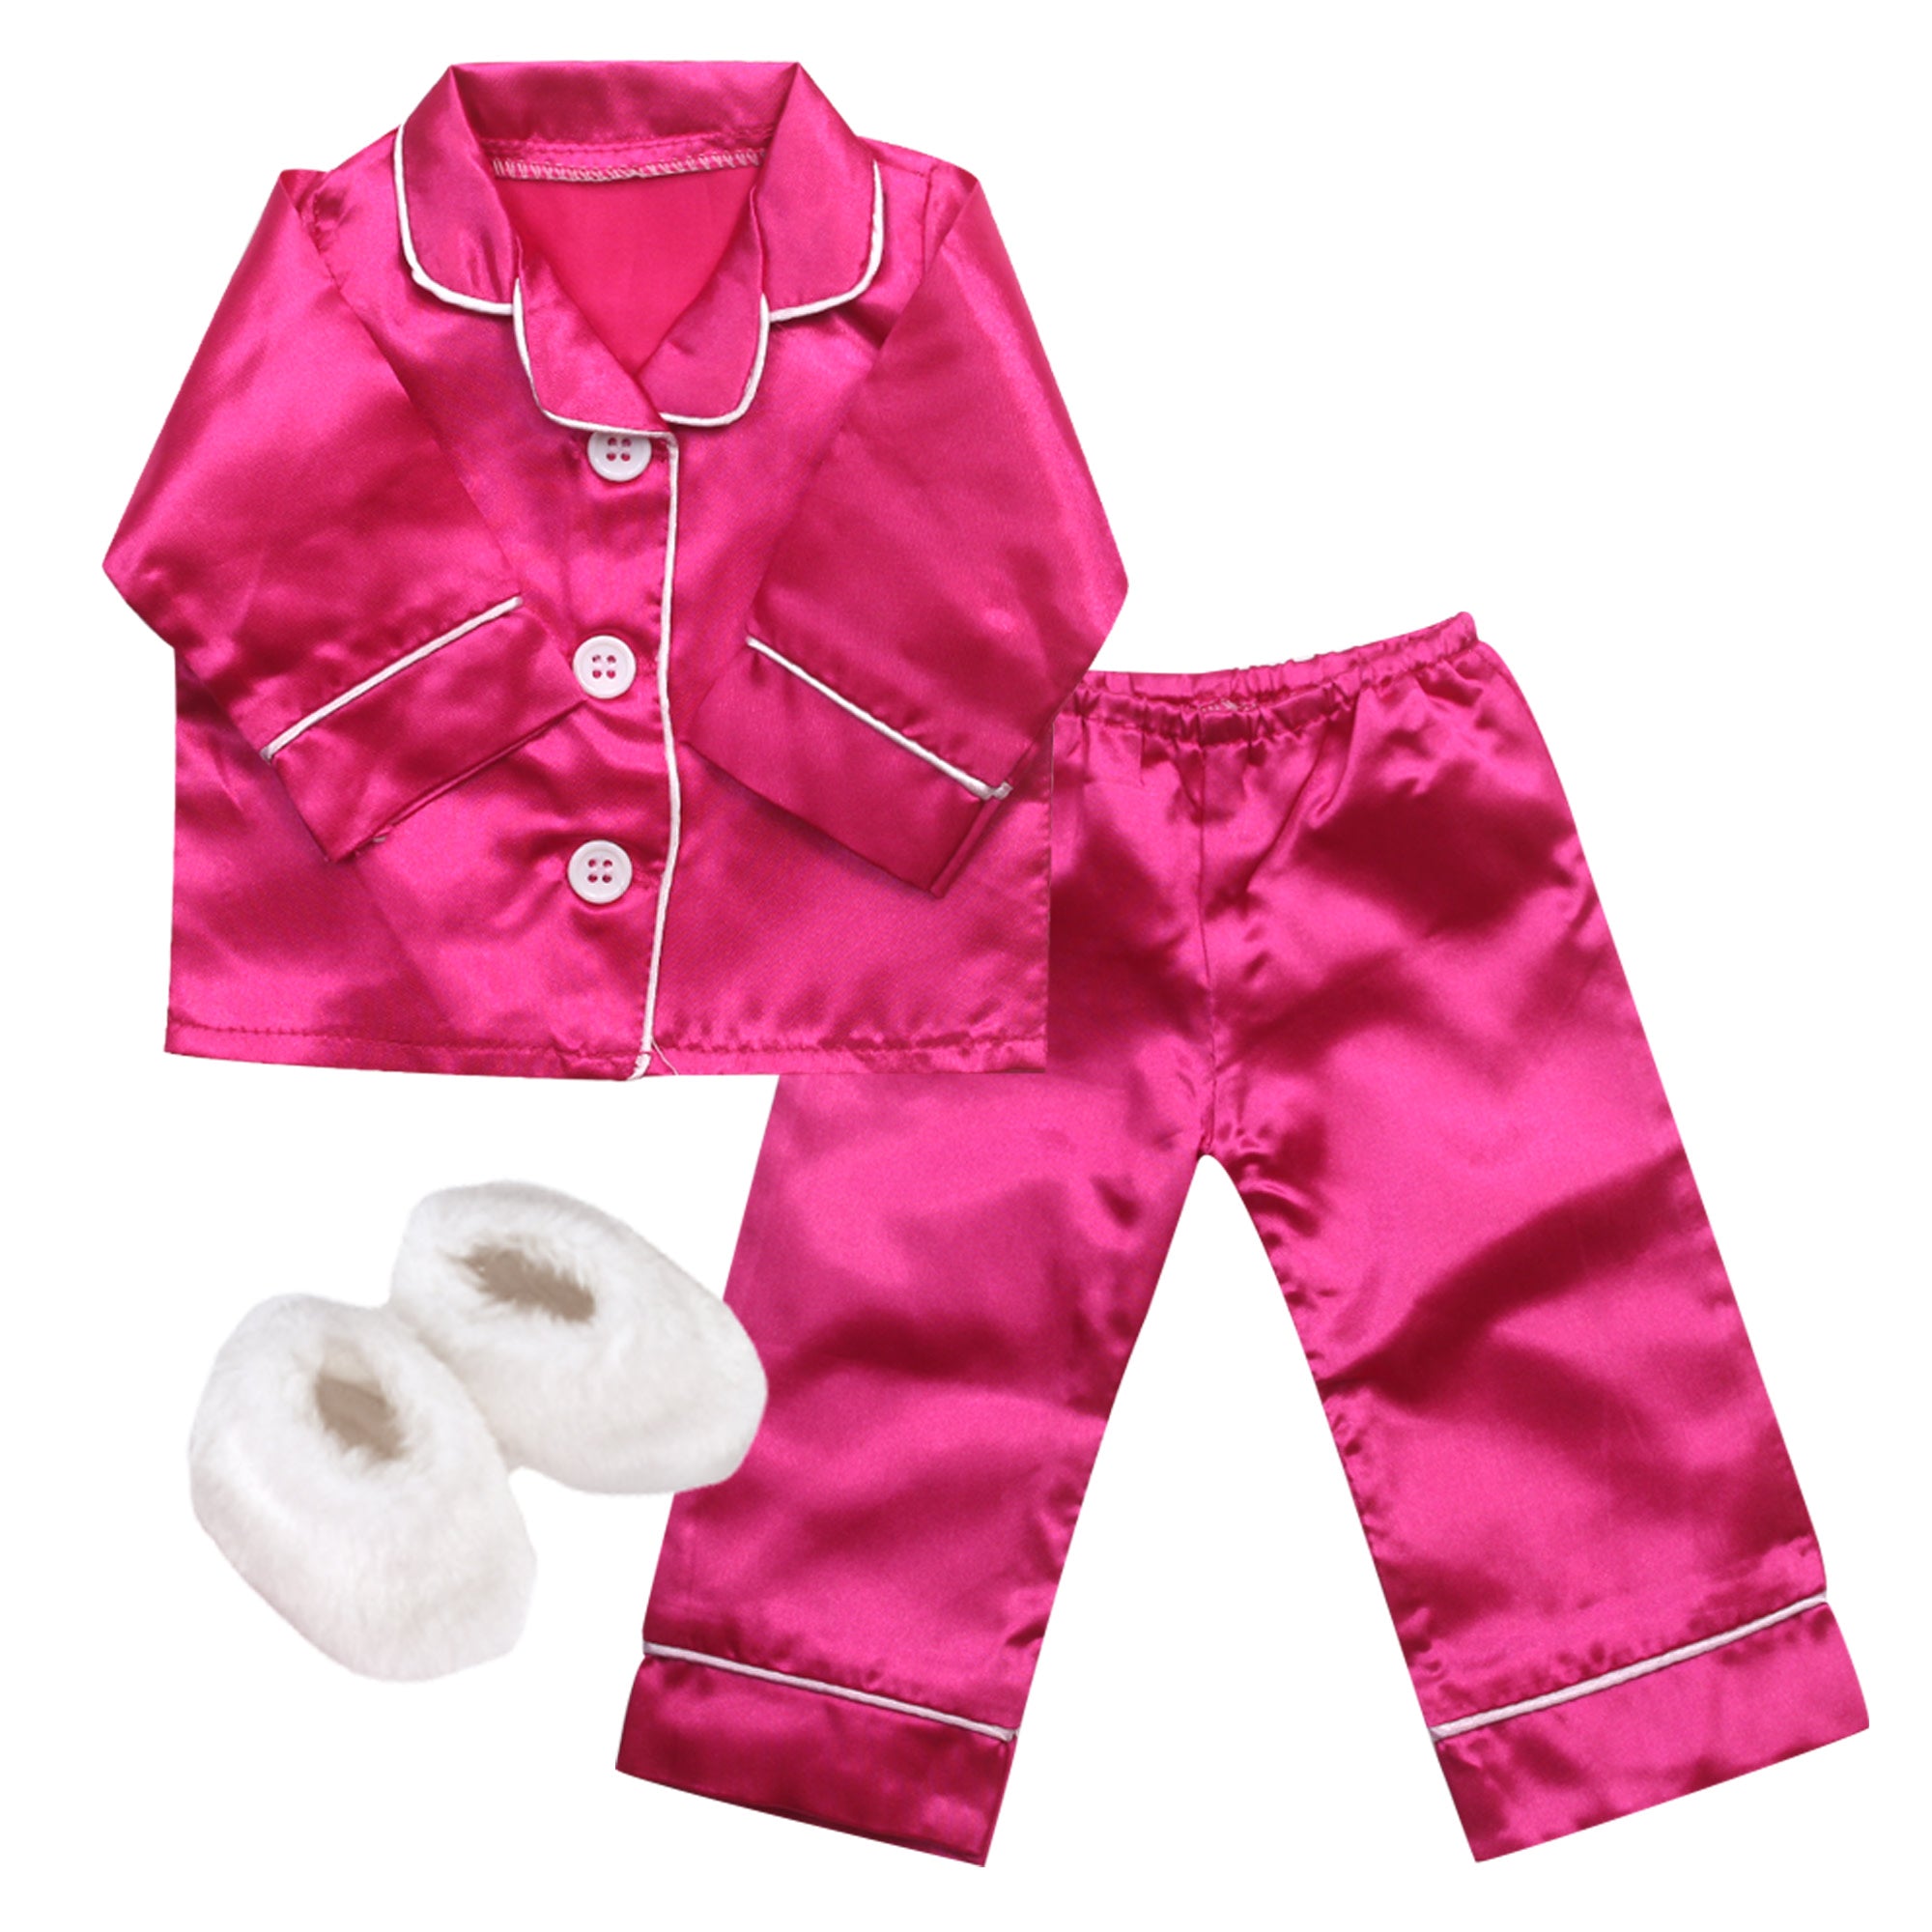 Sophia's 3 Piece Satin Pajama Set with Slippers for 18" Dolls, Hot Pink